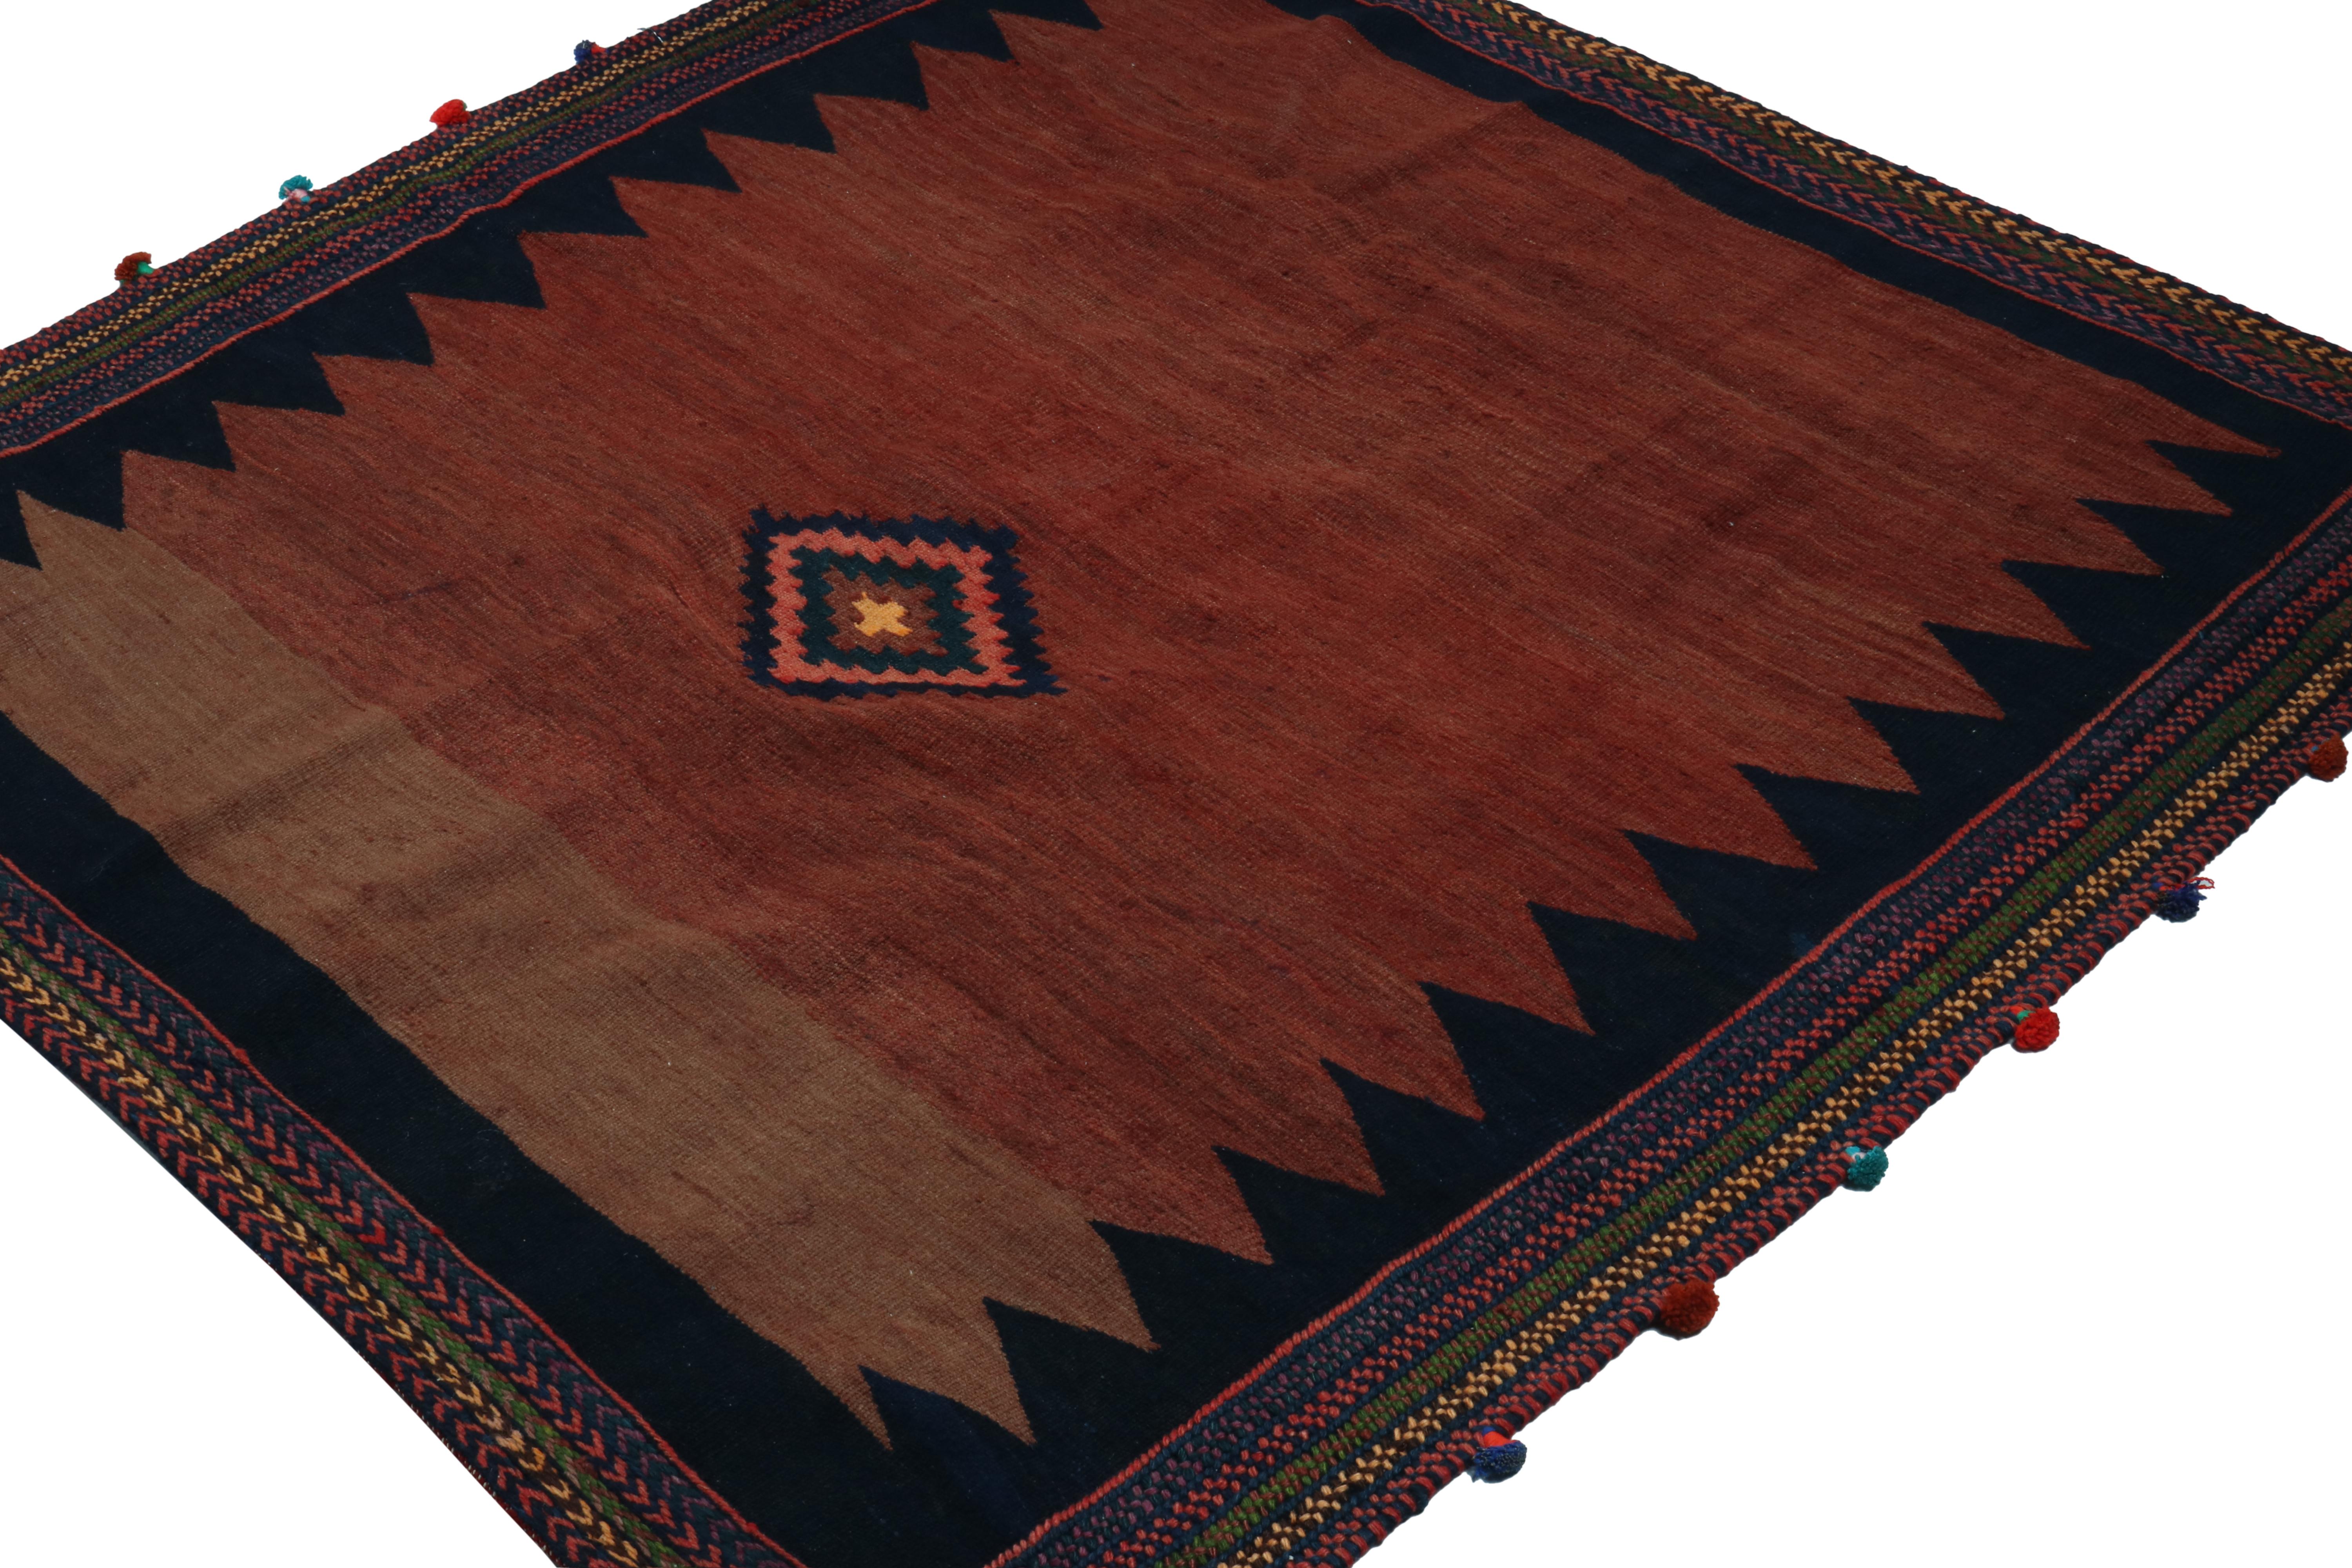 This vintage 4x4 Persian Kilim is a square rug of Sofreh provenance—handwoven in wool circa 1970-1980.

Further on the Design:

This piece employs a vibrant pink medallion that enjoys a natural center of gravity on the rich, rust brown